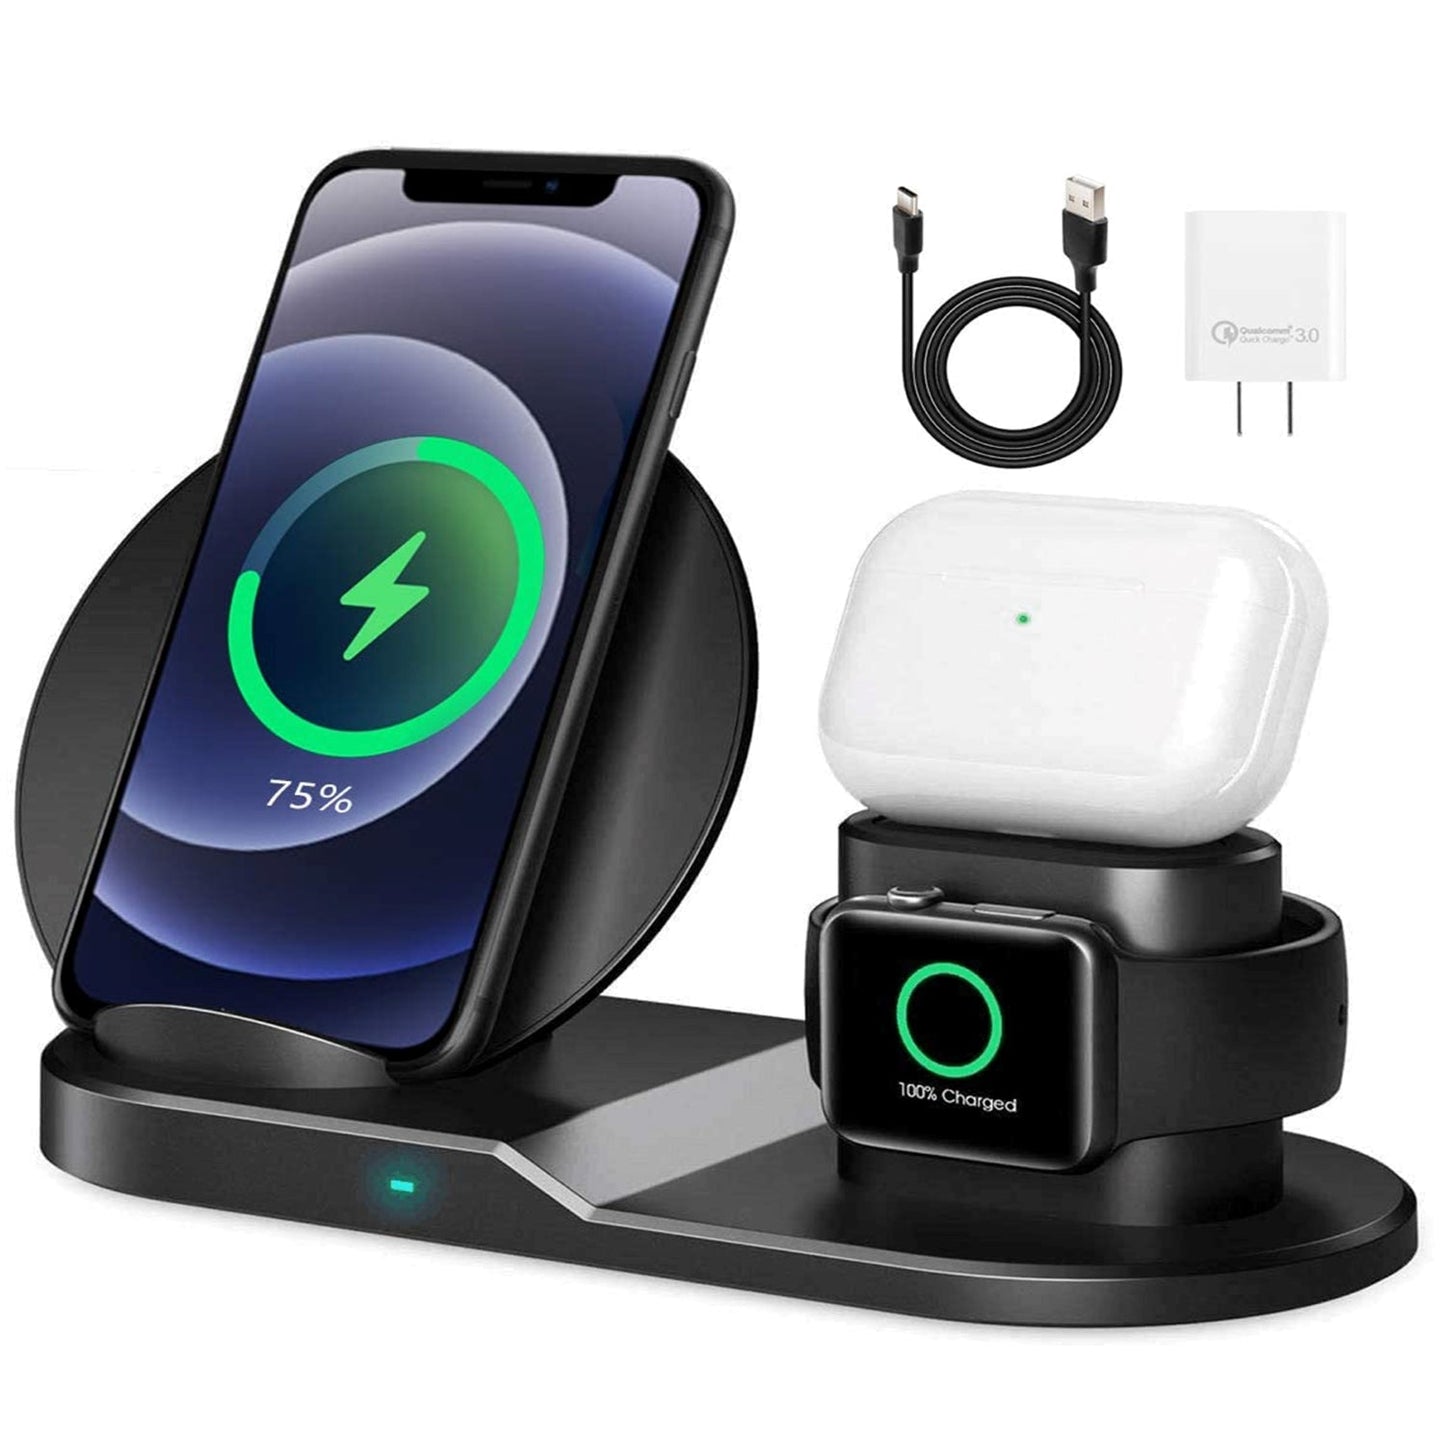 5 Core 3 in 1 Qi Wireless 10W / 15W Fast Charging Pad Stand Dock For